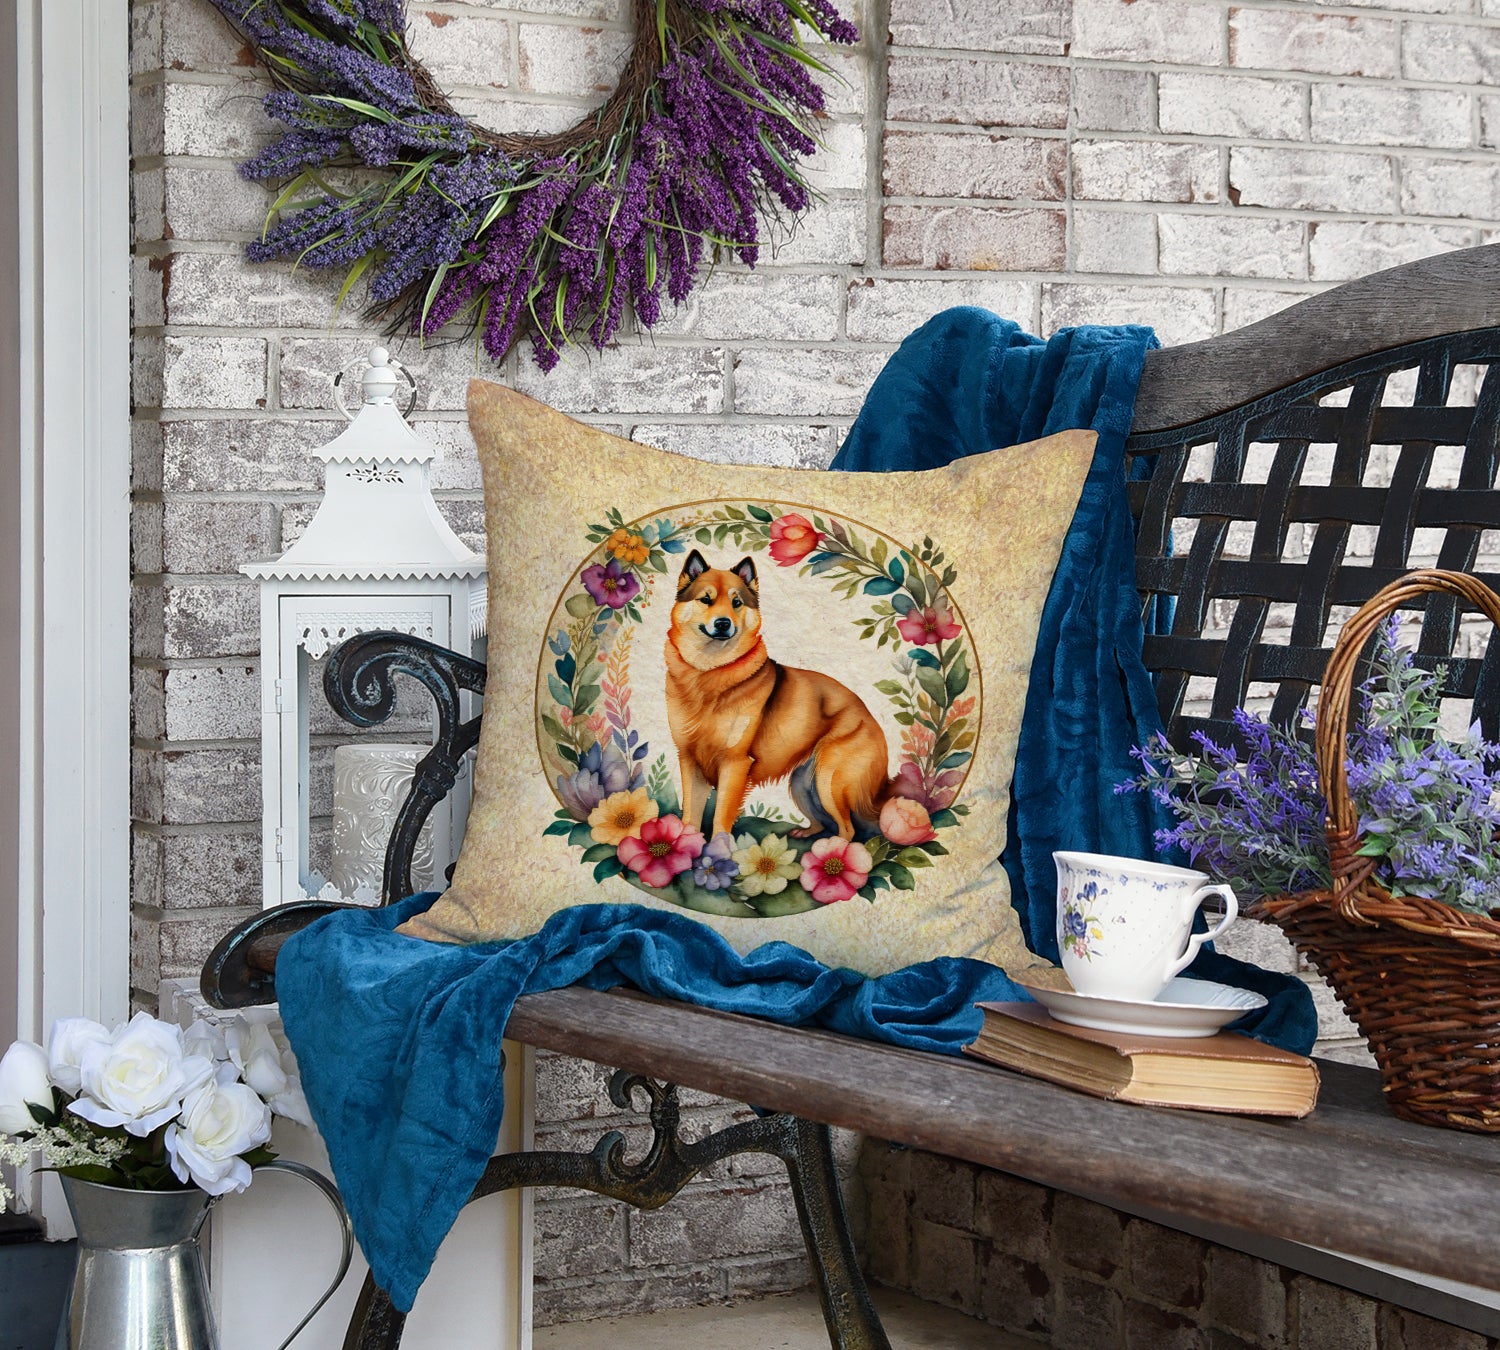 Finnish Spitz and Flowers Fabric Decorative Pillow